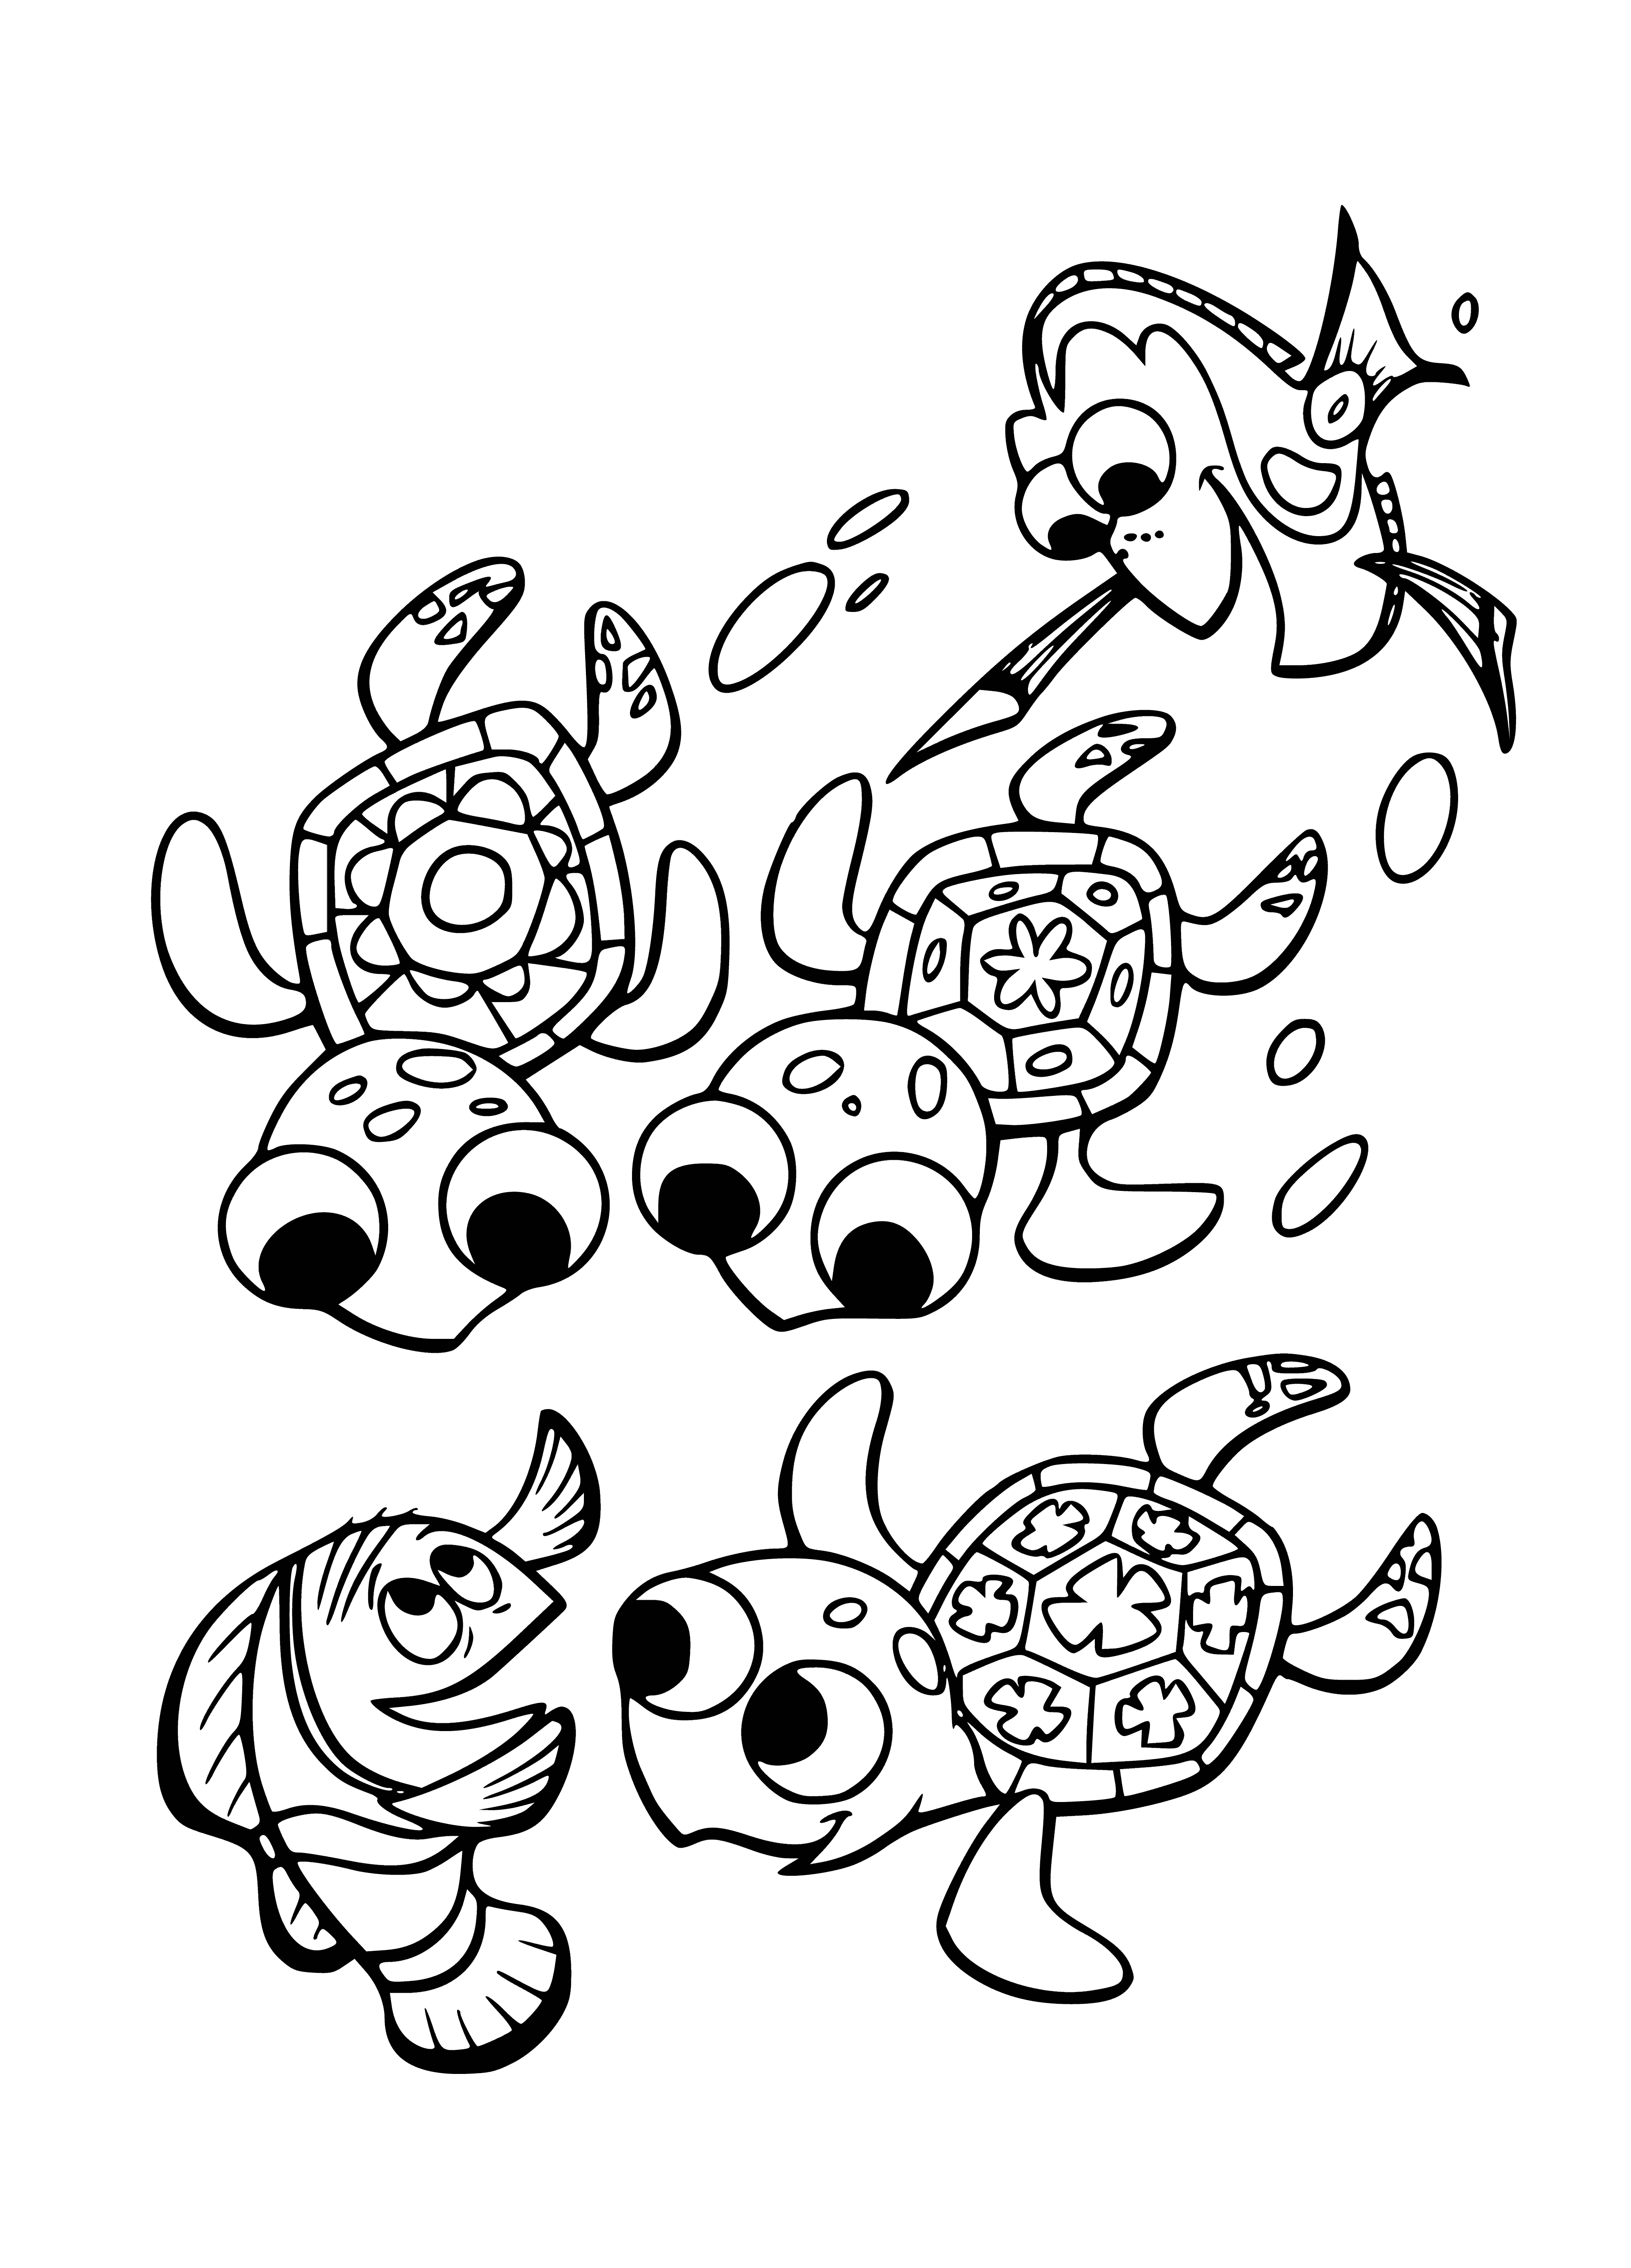 Turtles coloring page